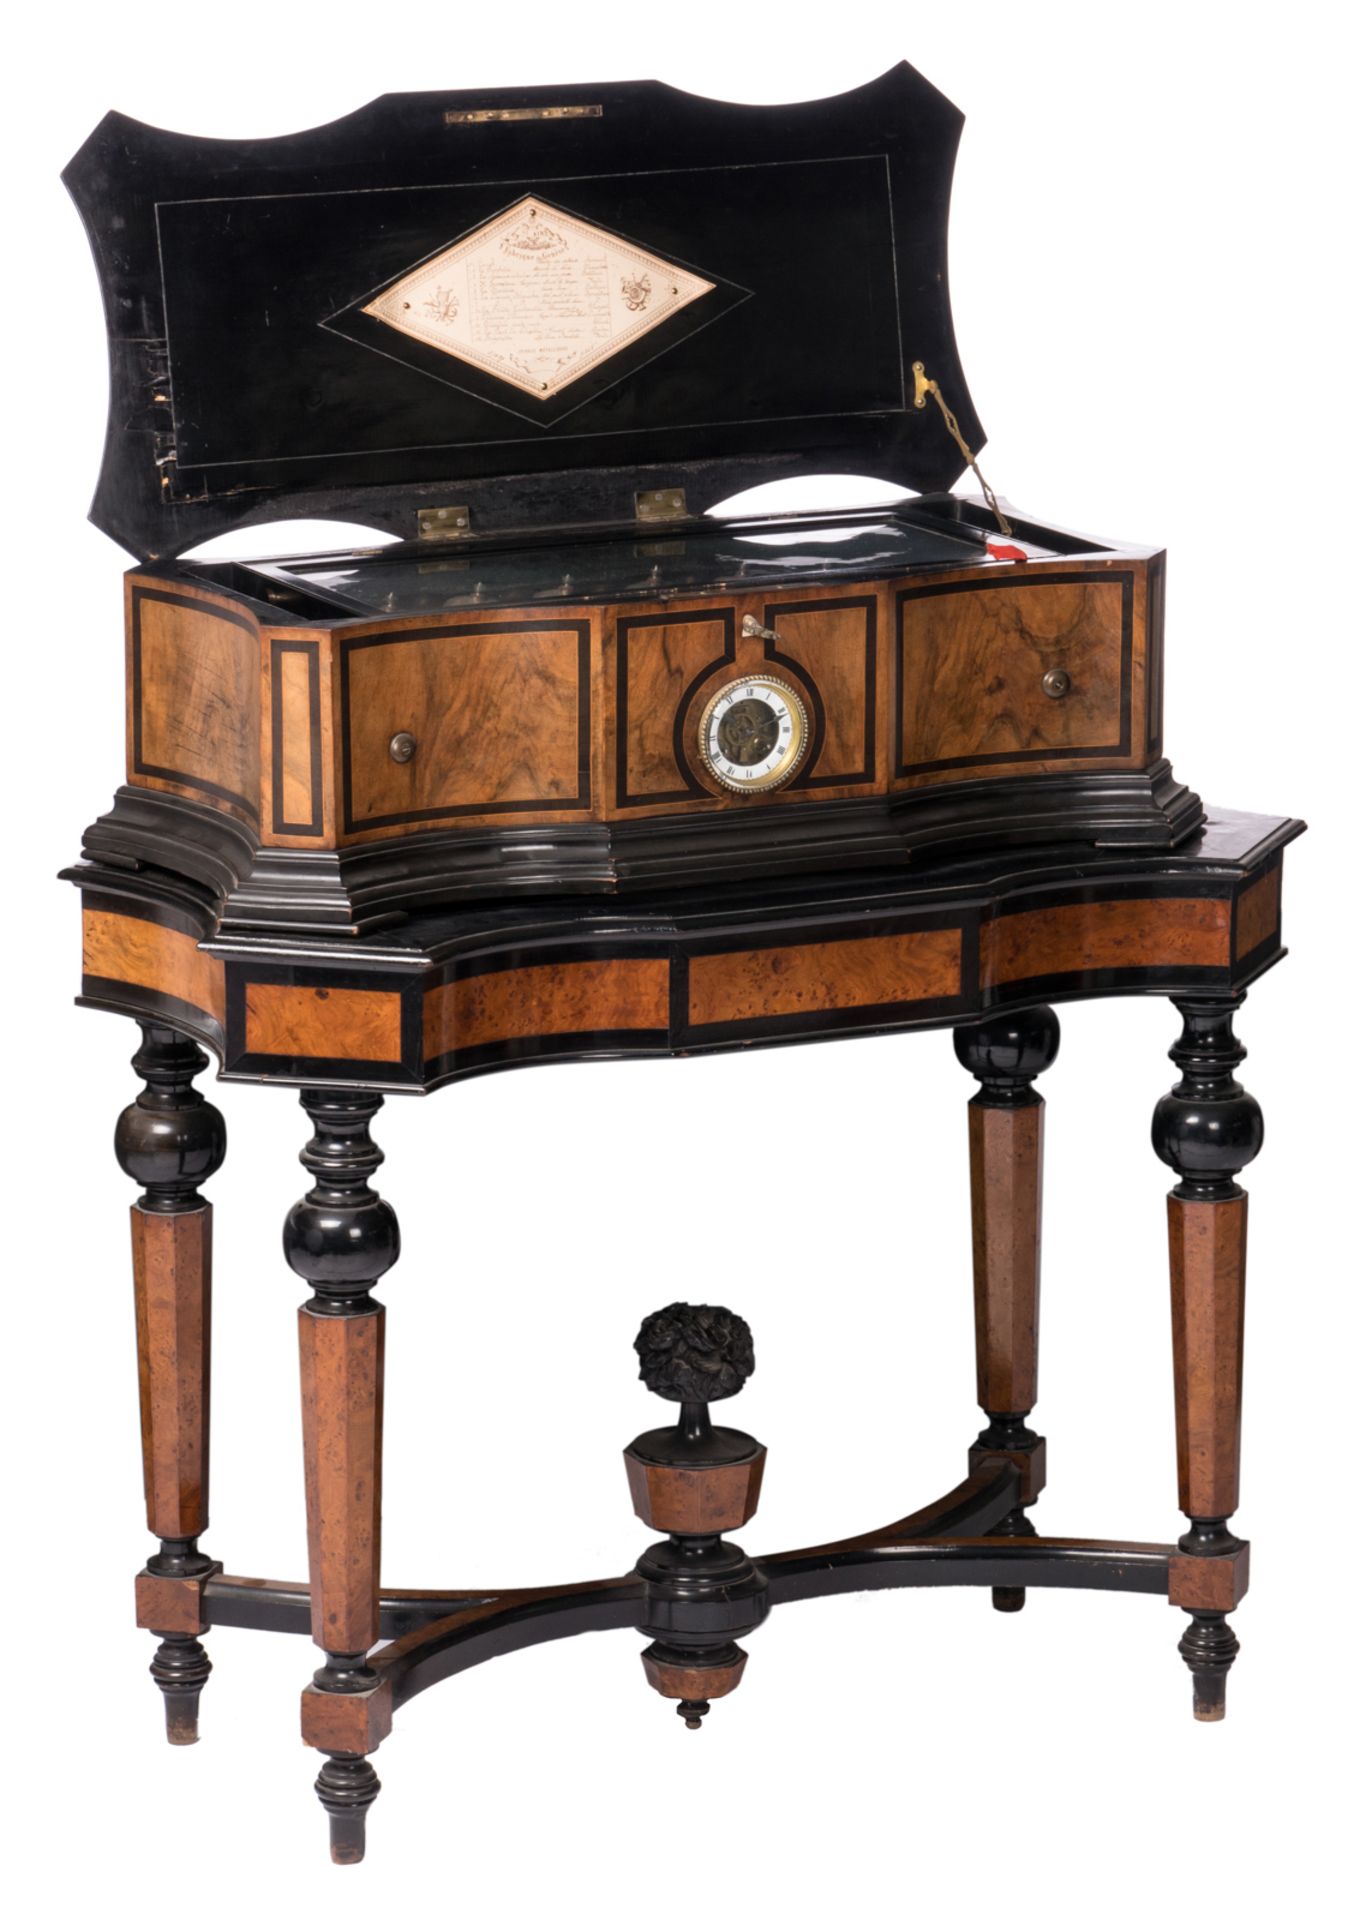 A fine burl walnut and ebonised wooden cylinder music box with orchestreon organ, 'Fabrique de